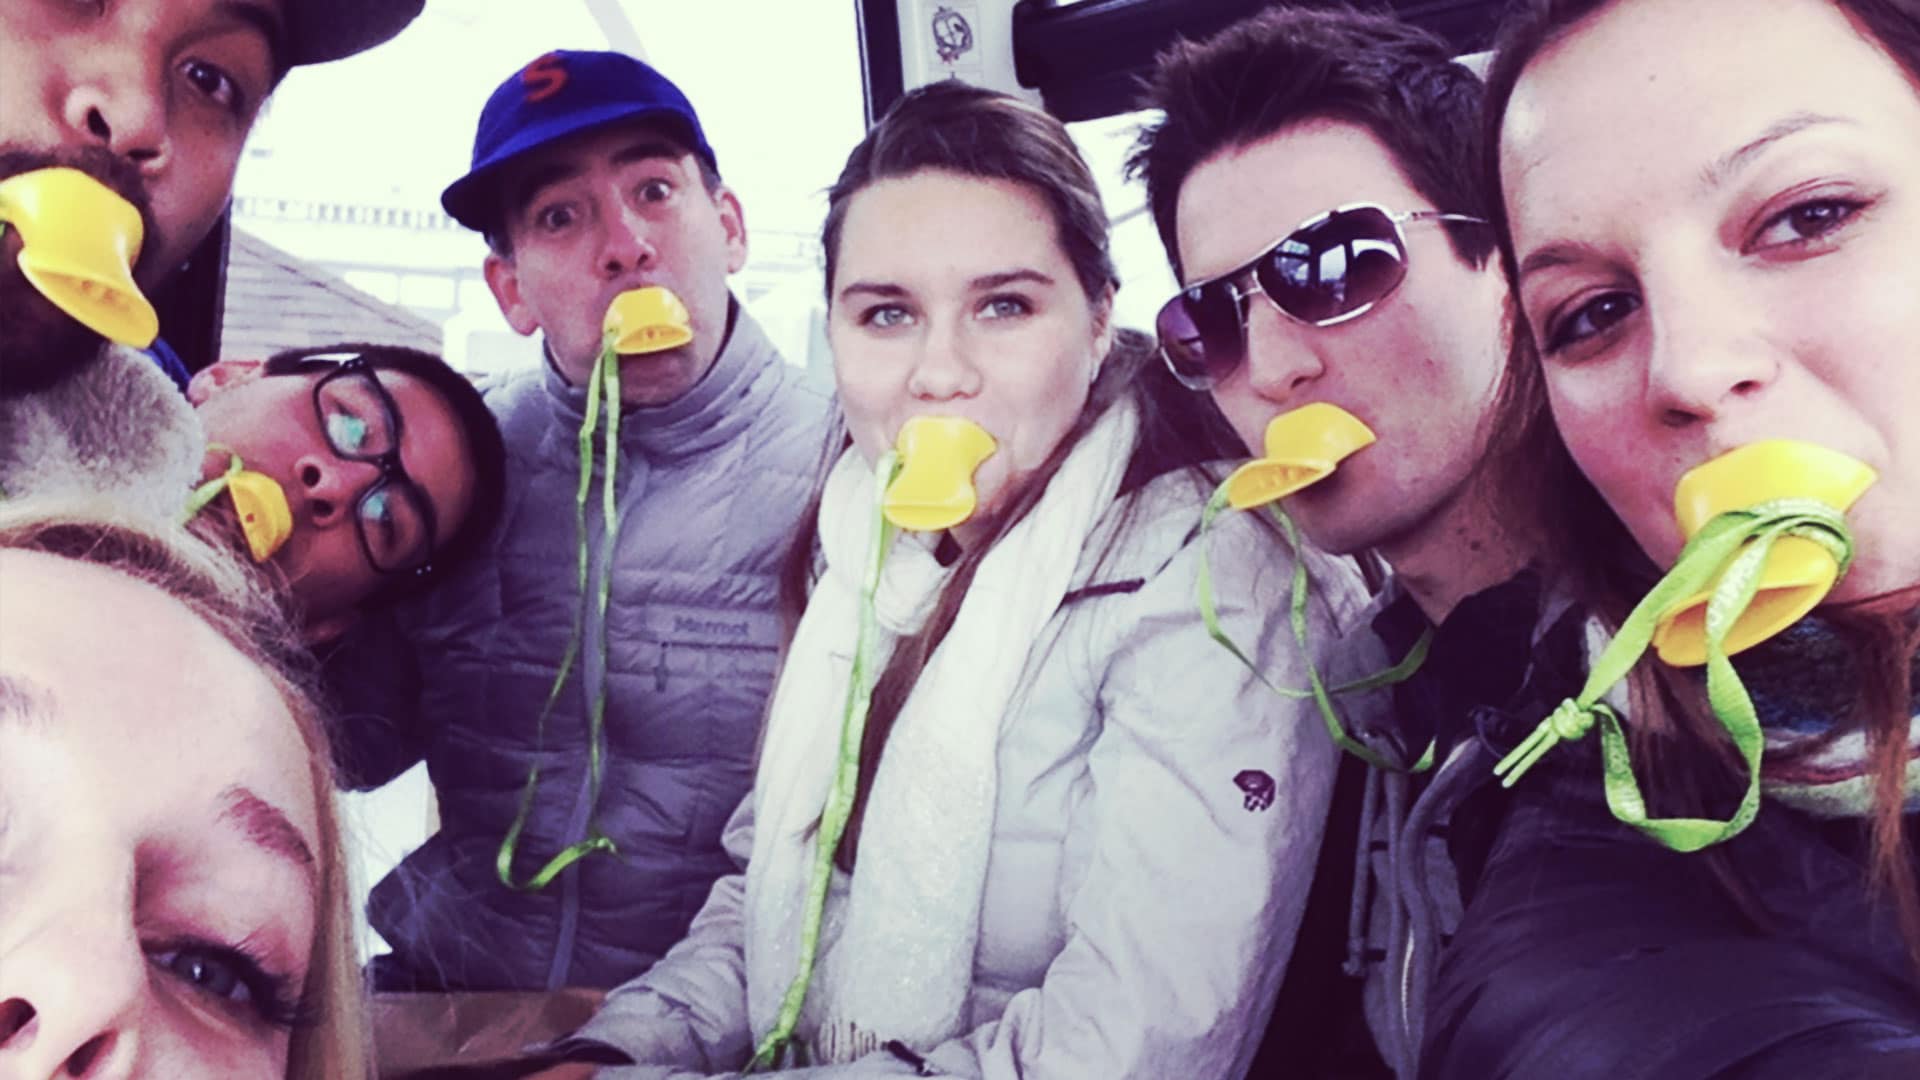 photo of people with yellow duck calls in their mouths